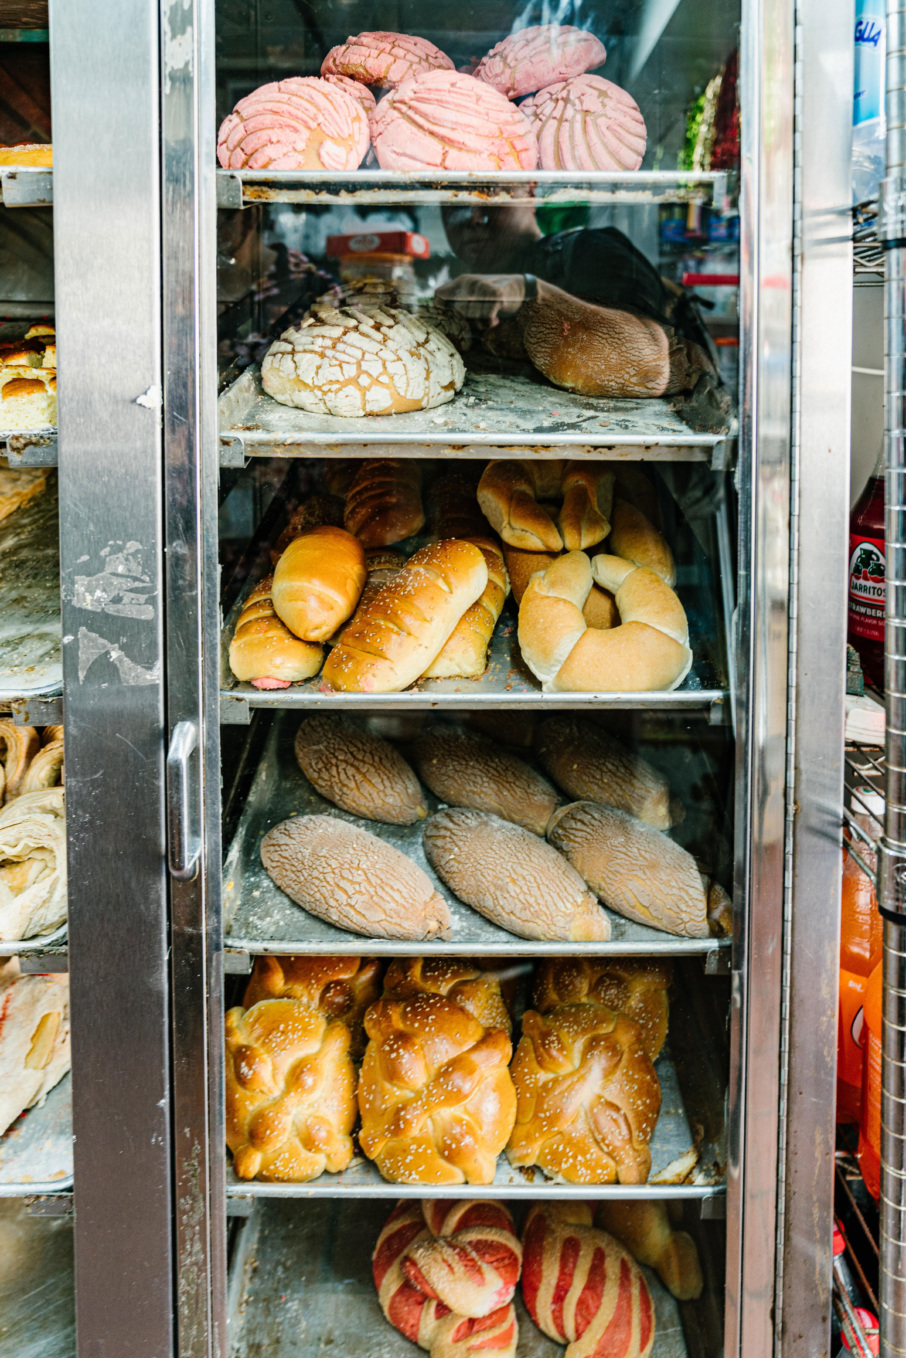 The breads or pan dulce at Vallecito Bakery.